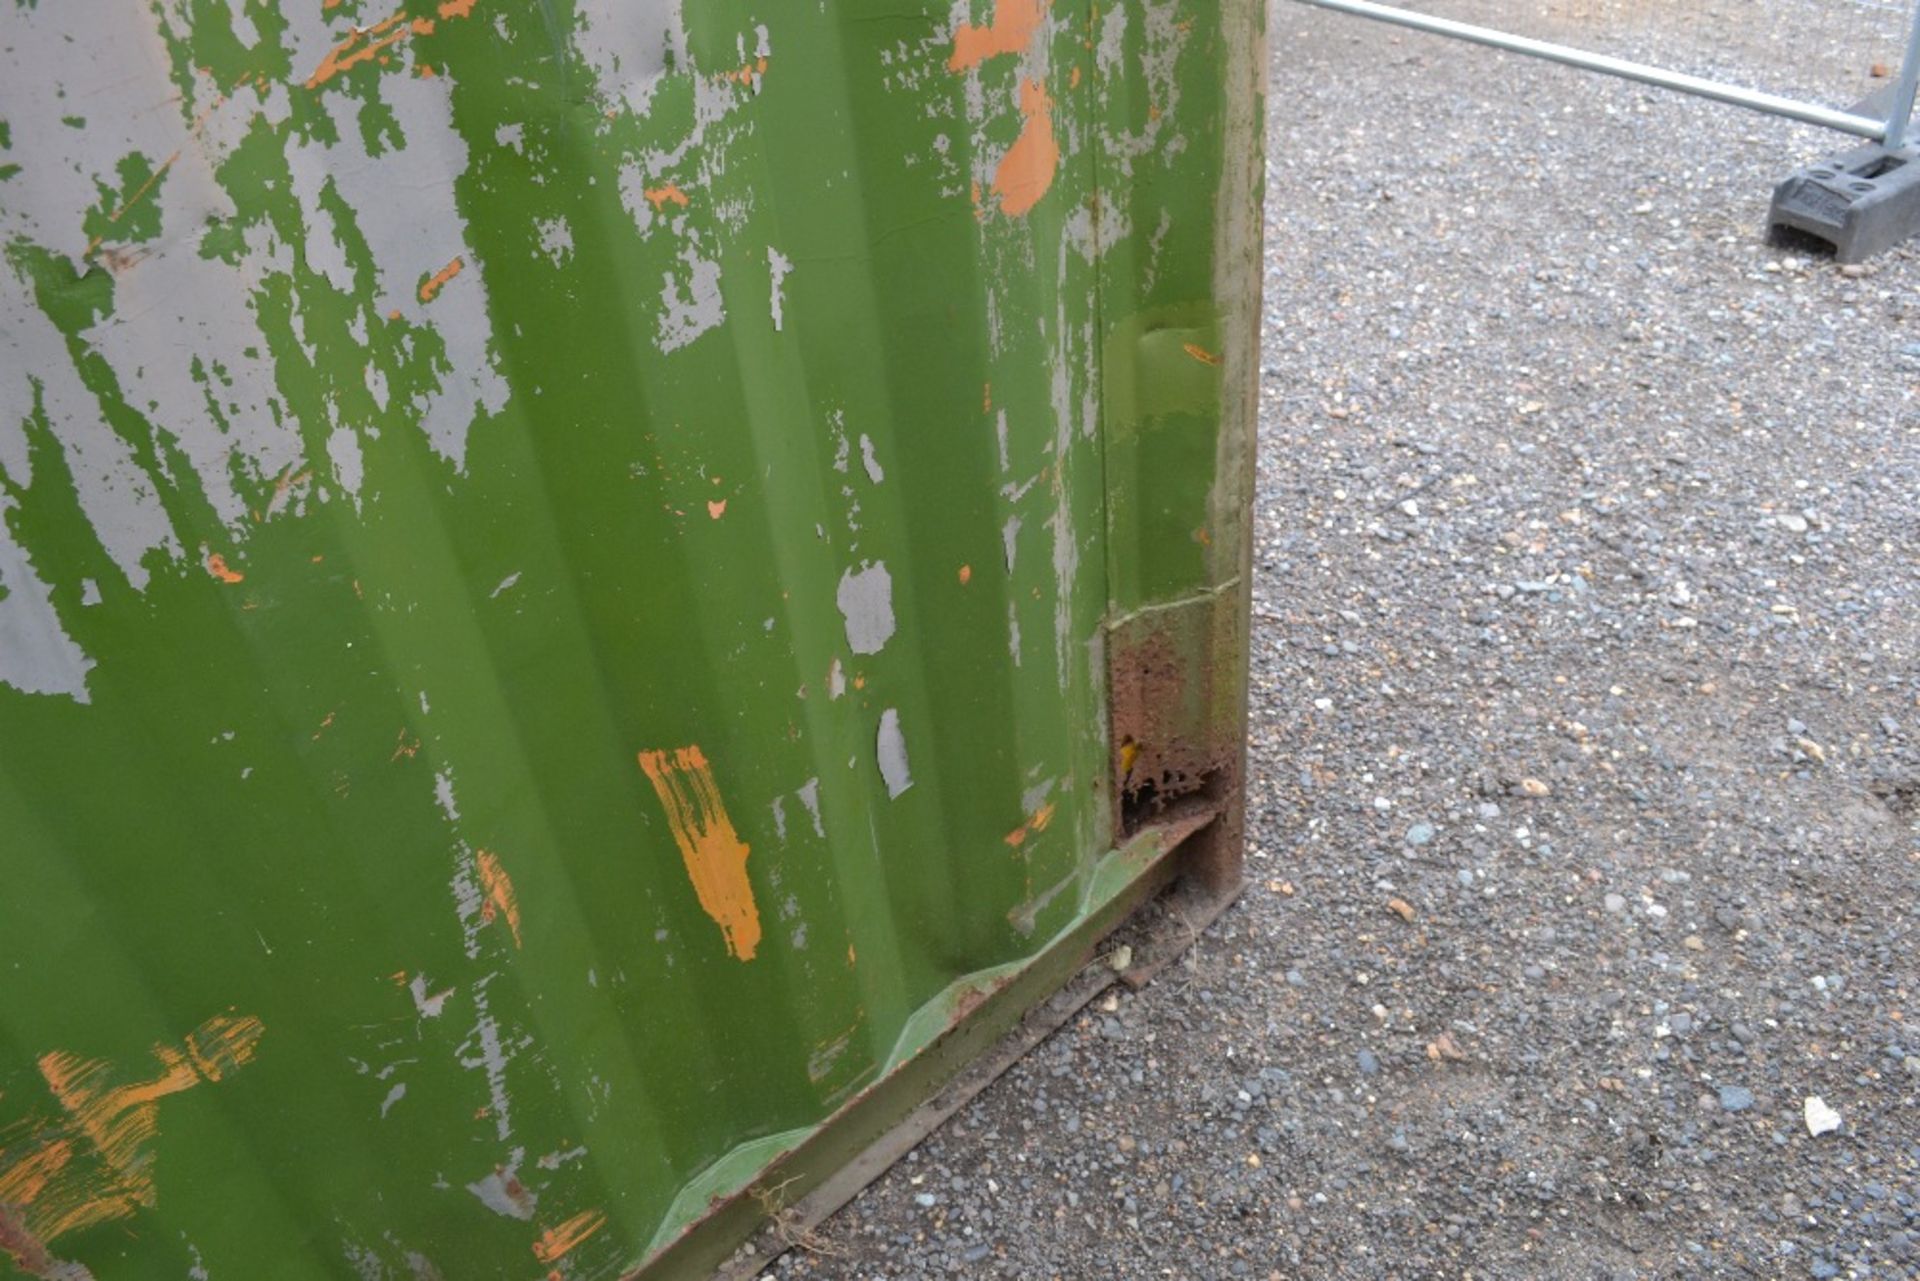 12ft x 8ft container. Loose contents not included. - Image 6 of 11